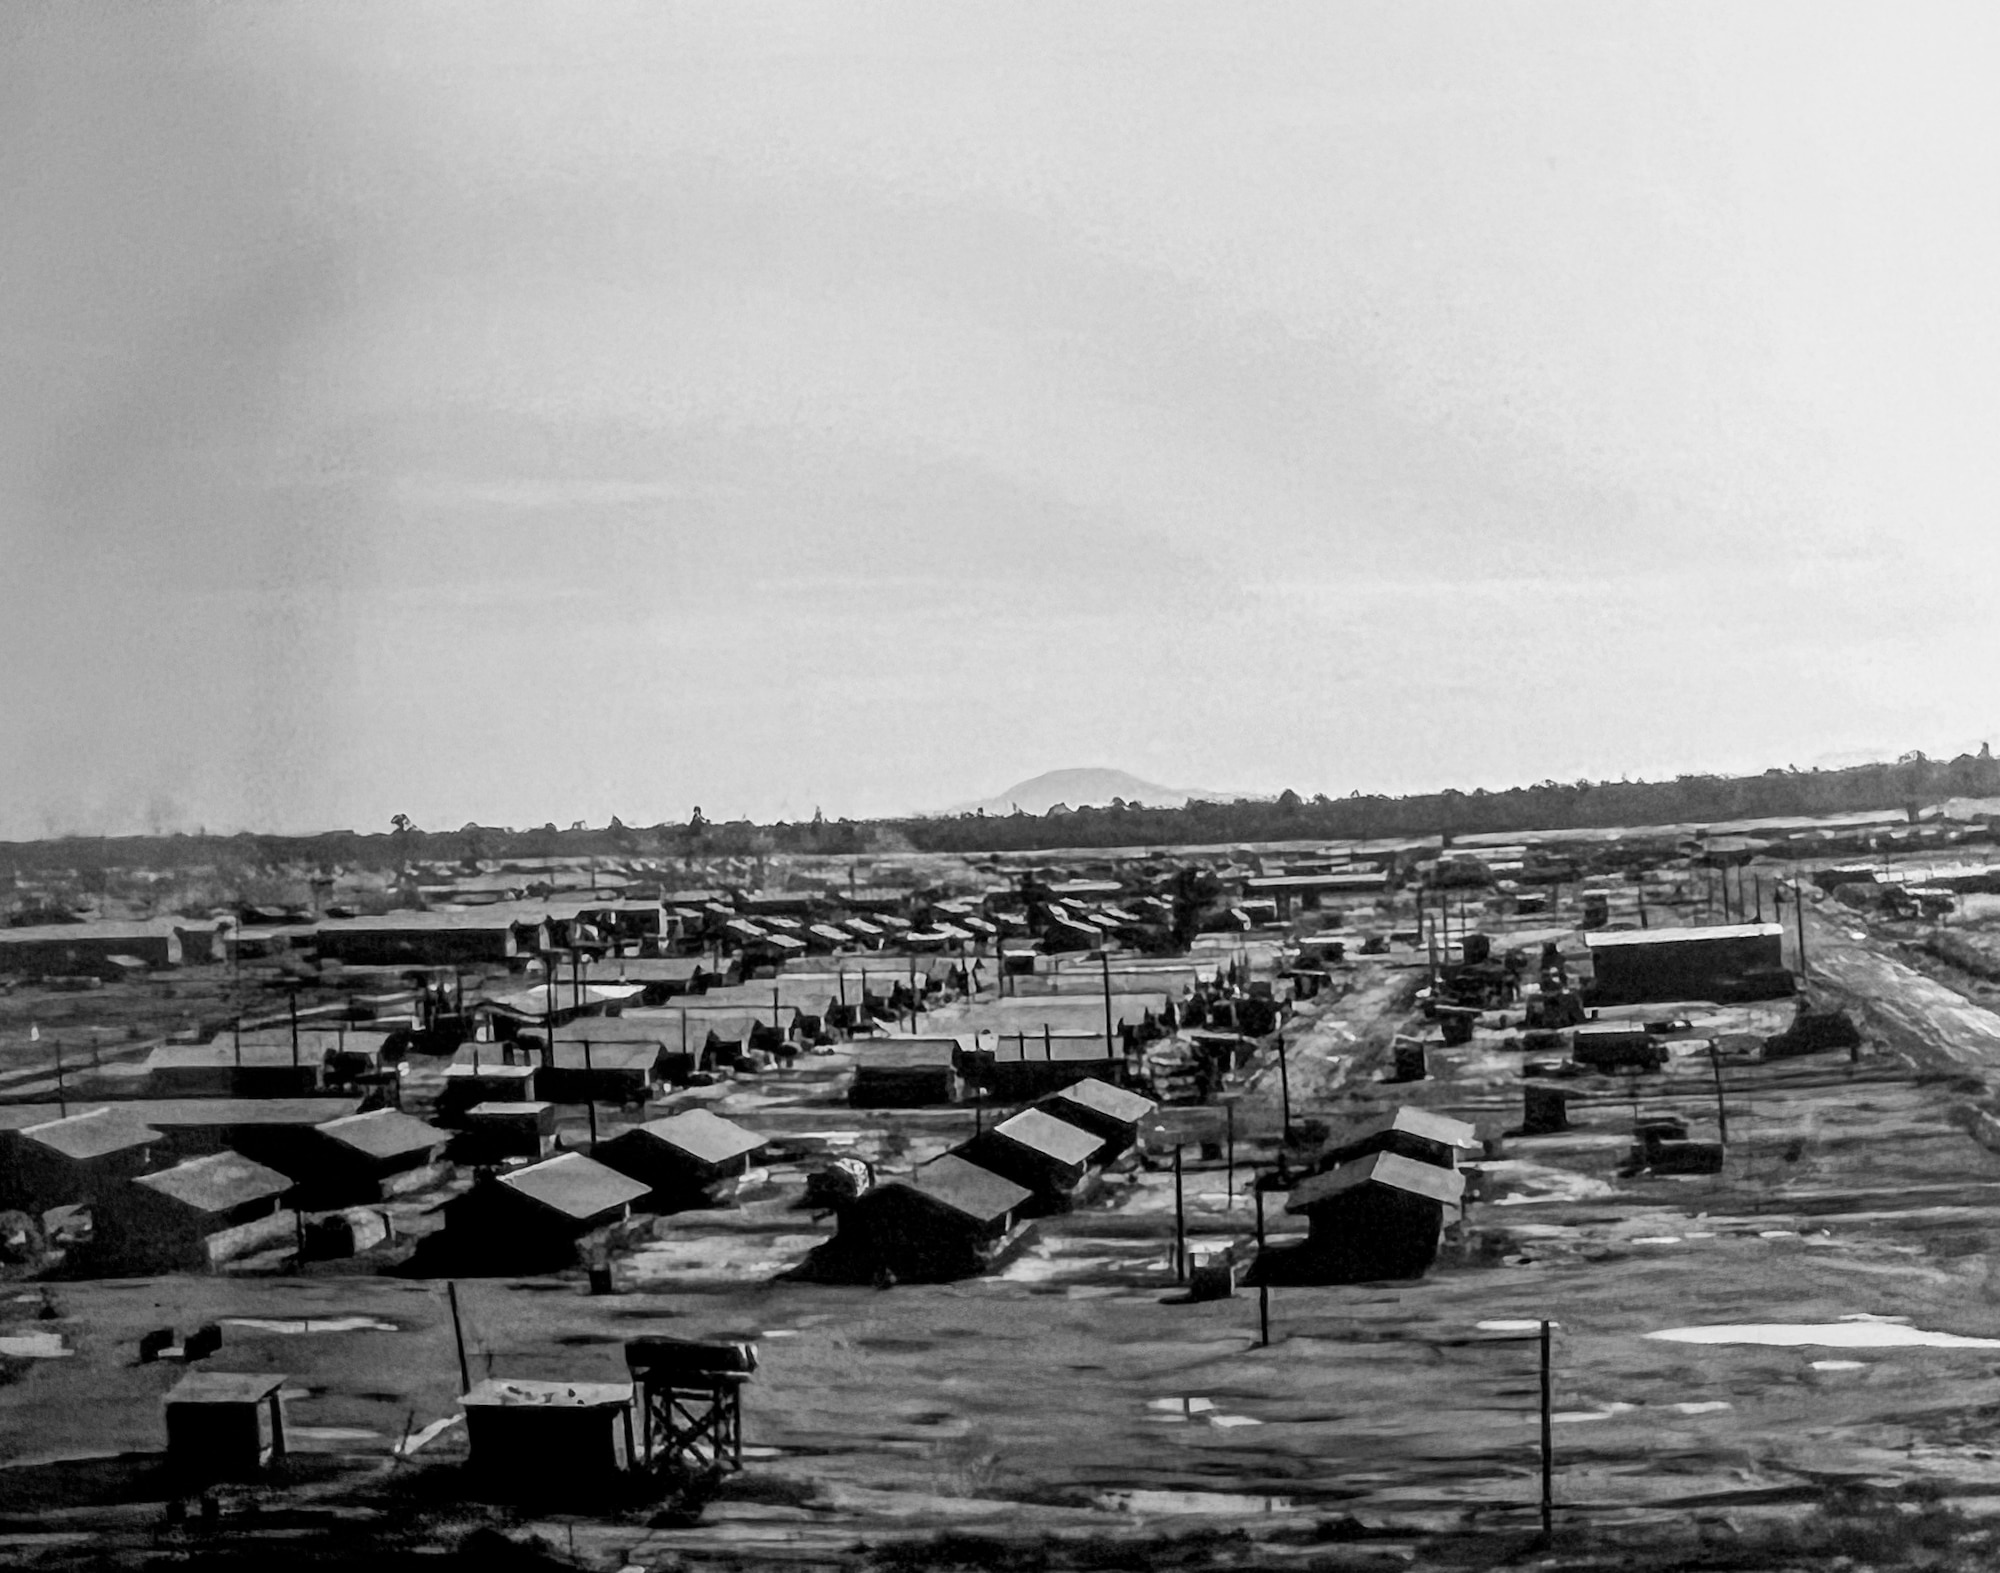 Facilities and skyline at the 19th Tactical Air Support Squadron (TASS), Tan Son Nhut Airbase, III Corps, South Vietnam in 1970. Retired Brig. Gen. Kenneth J. Stromquist serviced as an O-2 Skymaster pilot at the 19th TASS.